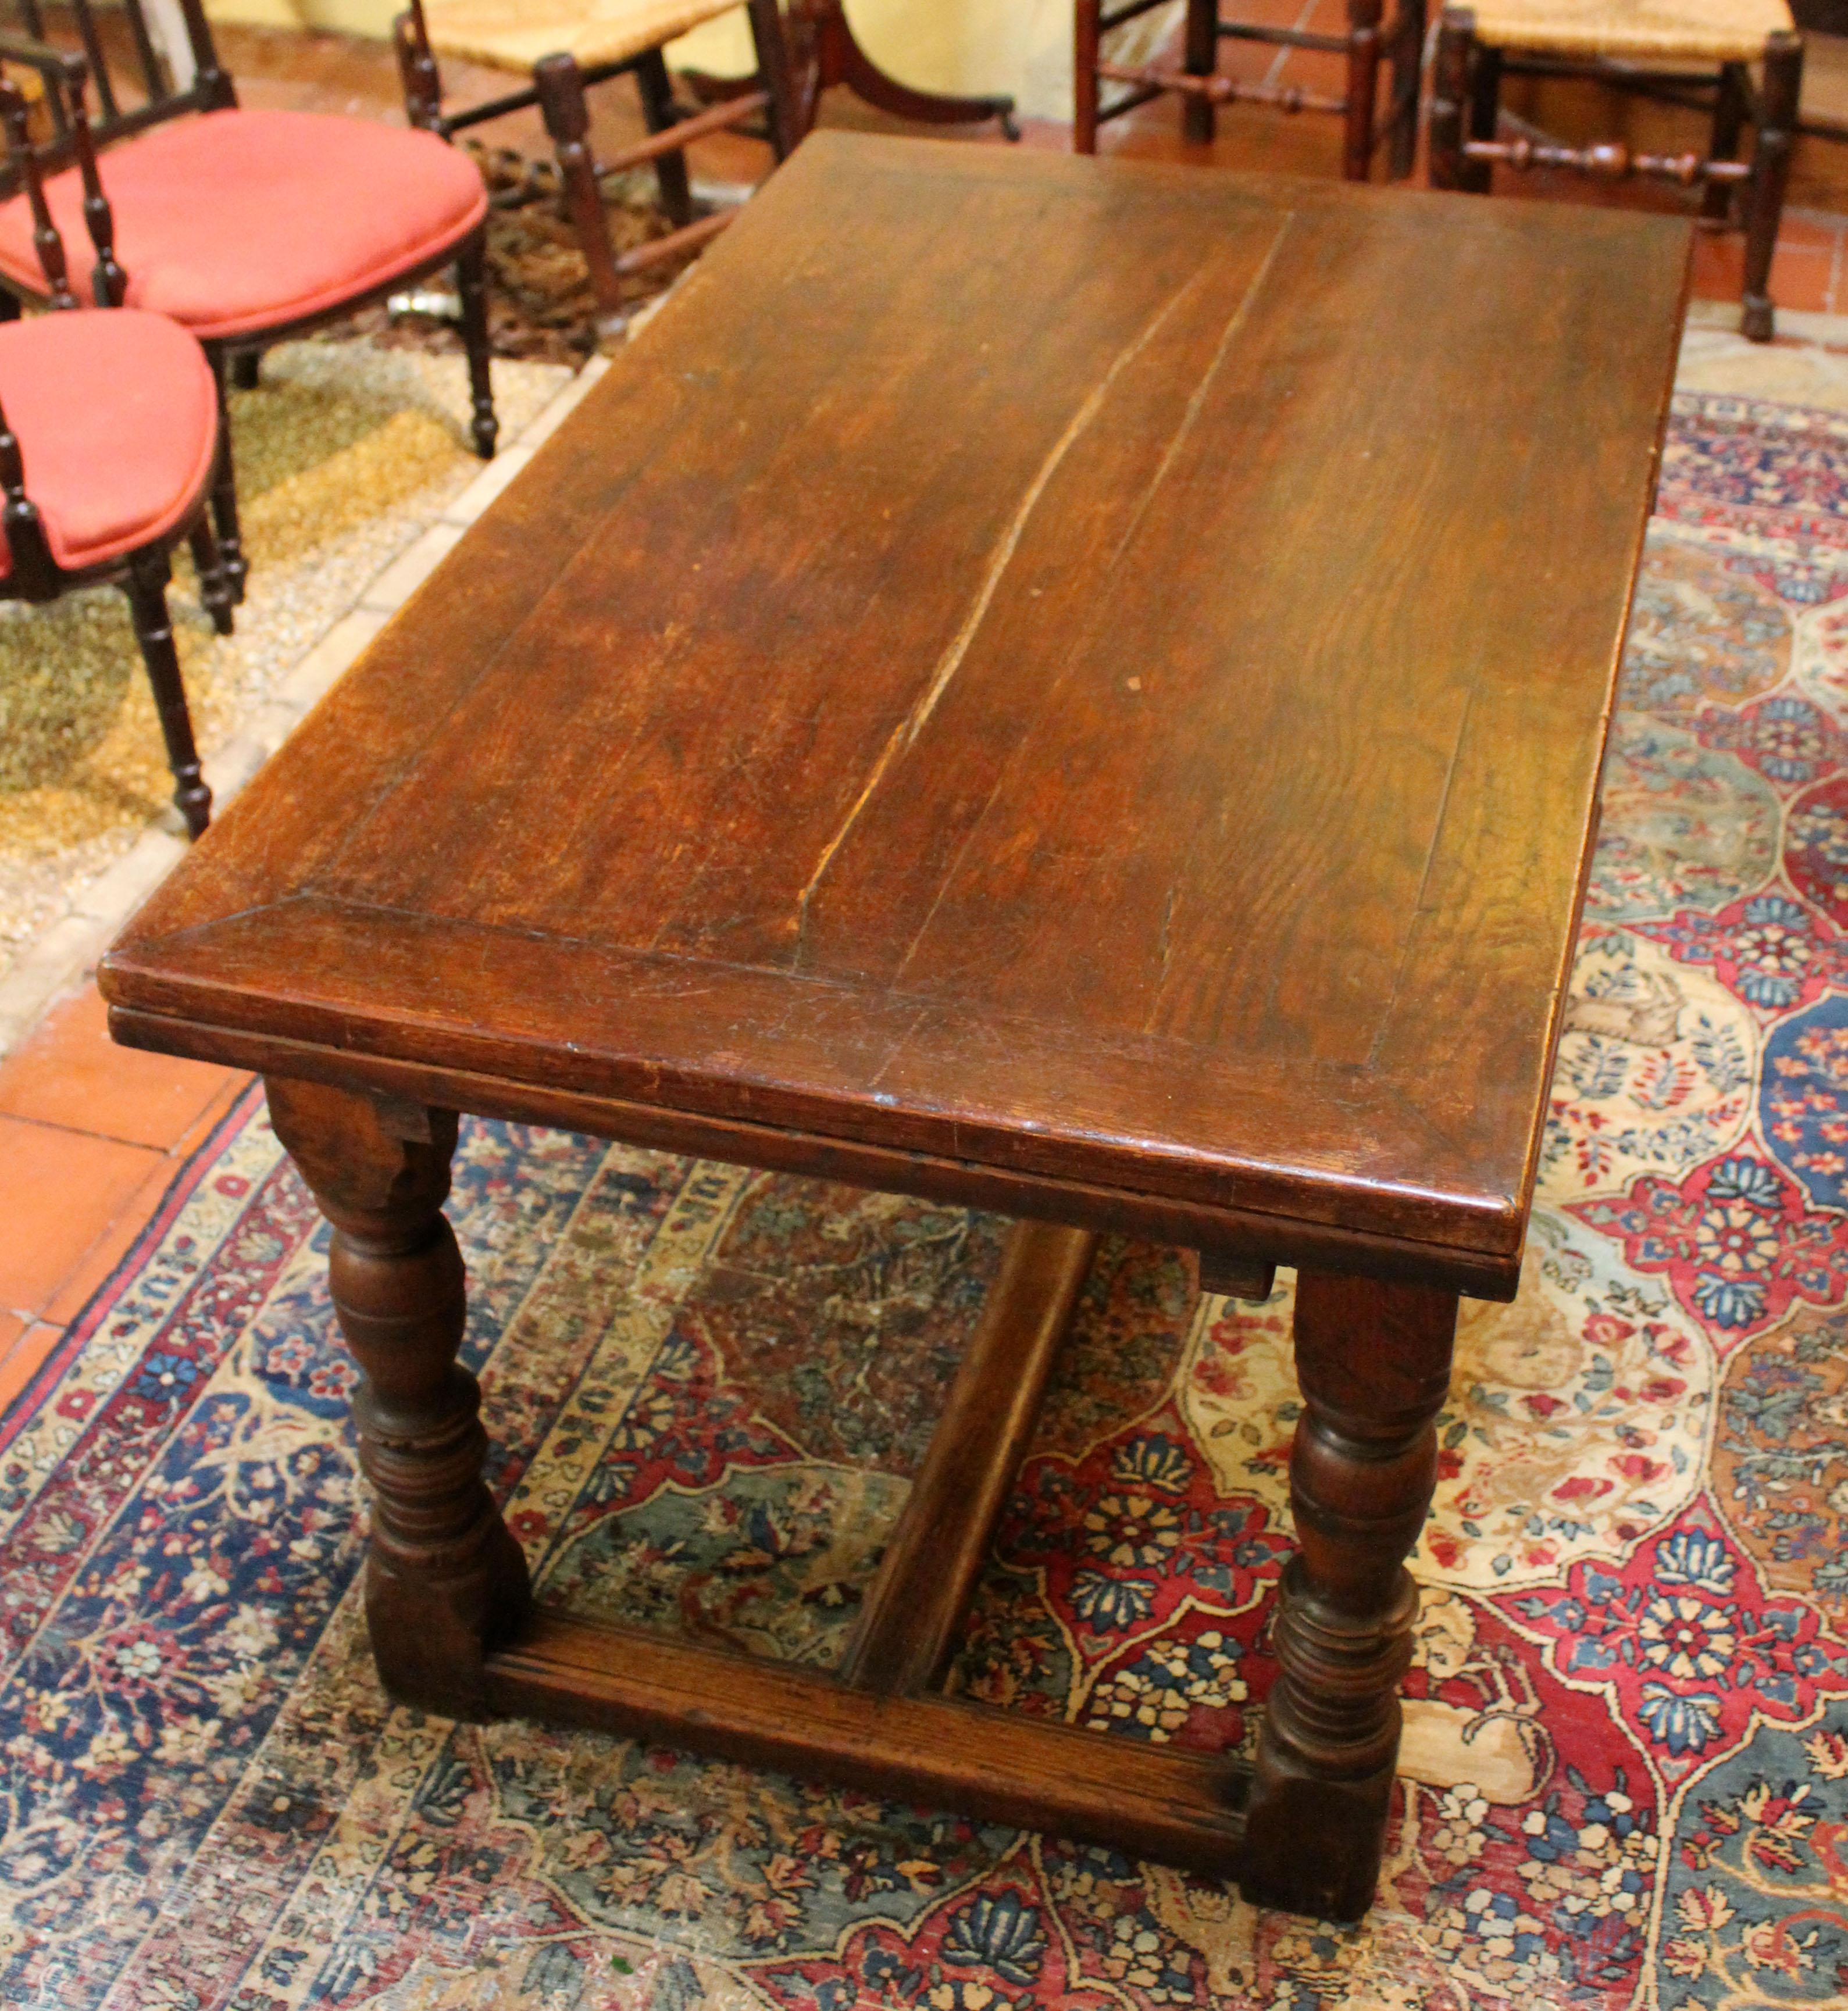 19th Century Circa 1860 Jacobean Revival Style Draw Leaf Table